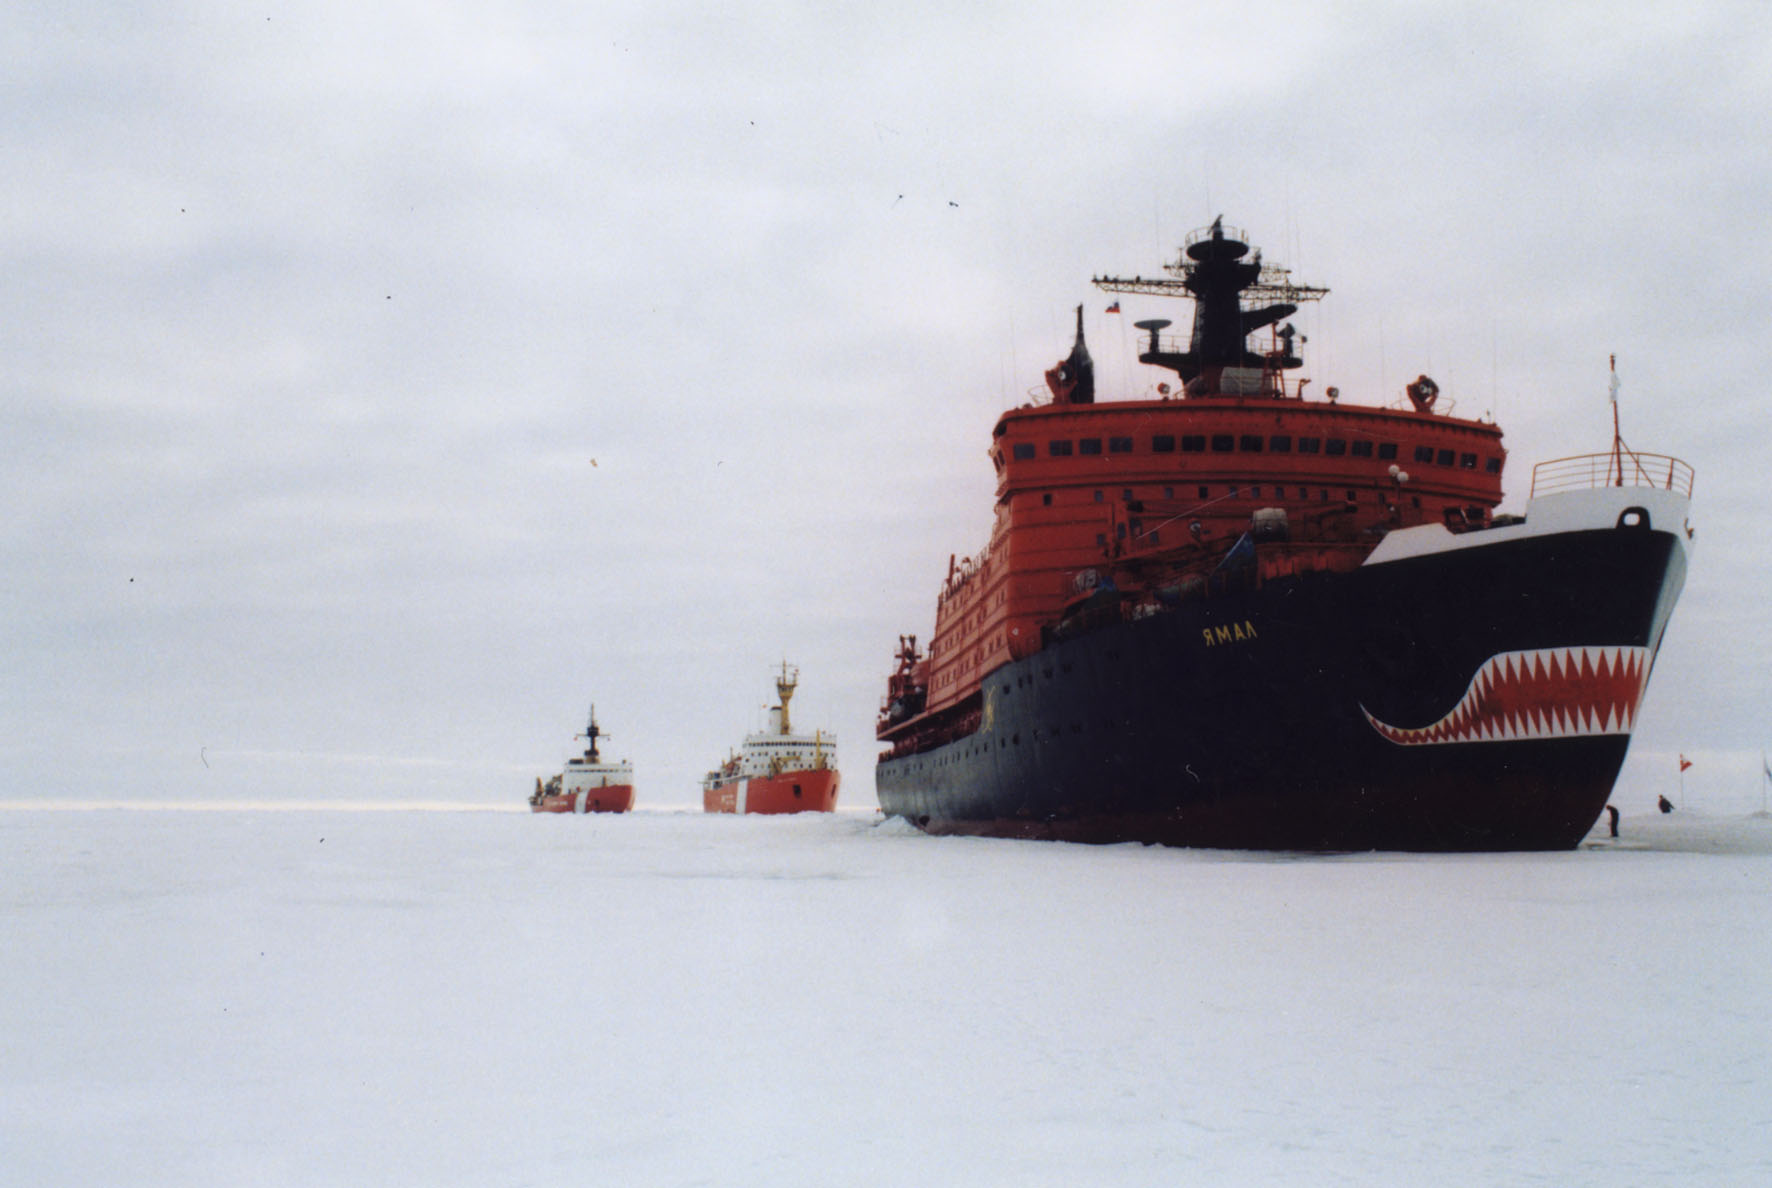 Russian icebreaker Yamal, Canadian icebreaker Louis S. St. Laurent and the Coast Guard Cutter Polar Sea rendezvous near the North Pole in 1994. US Coast Guard Photo